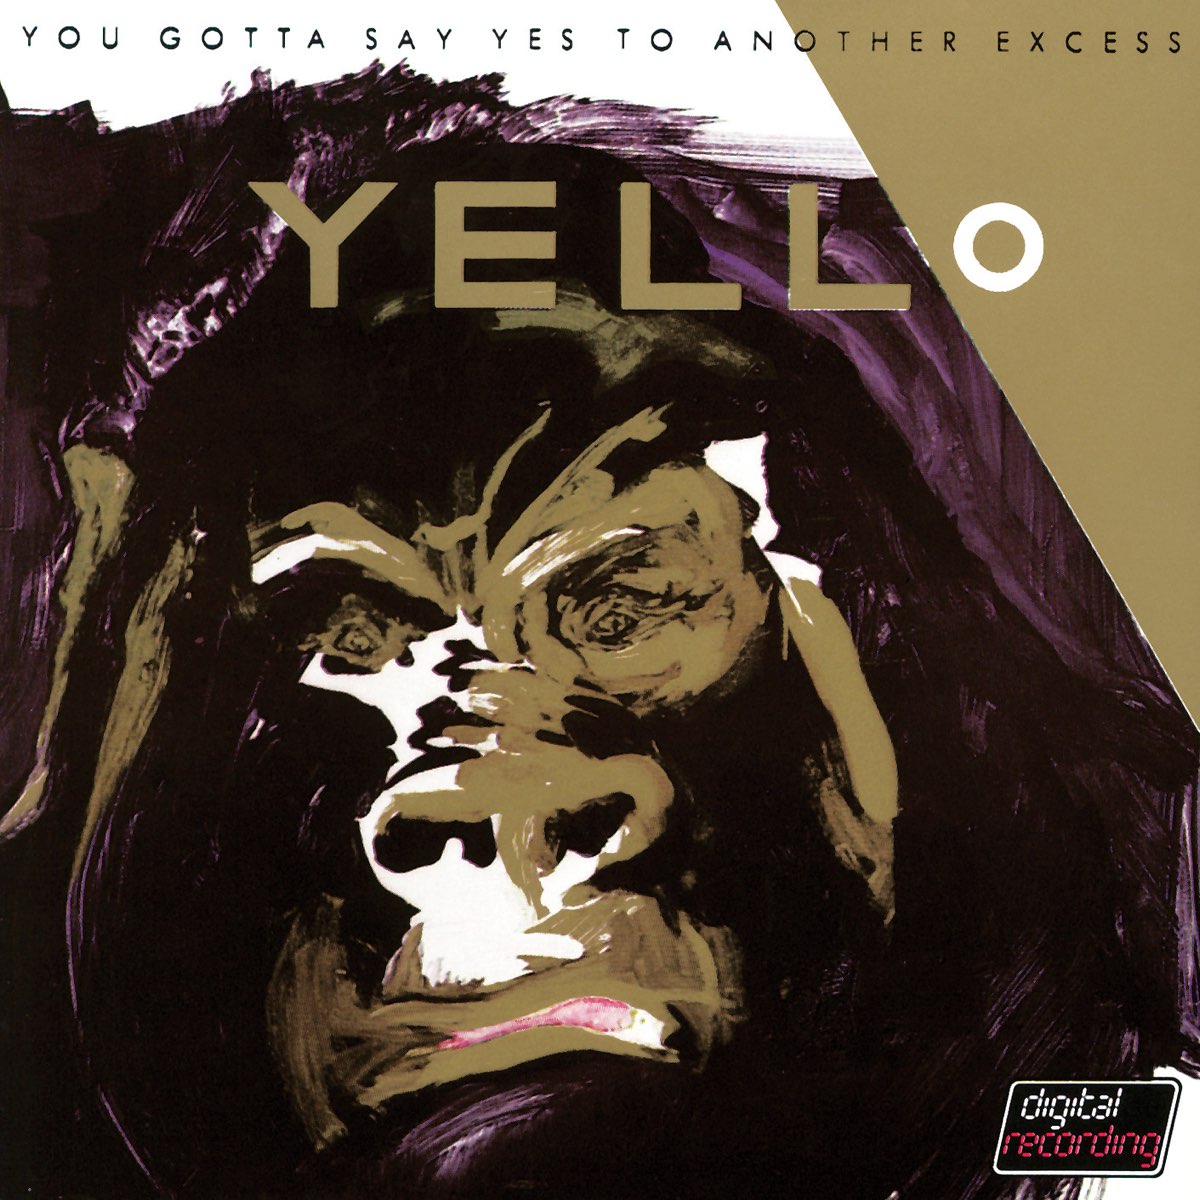 ‎You Gotta Say Yes to Another Excess (Deluxe Edition) by Yello on Apple ...